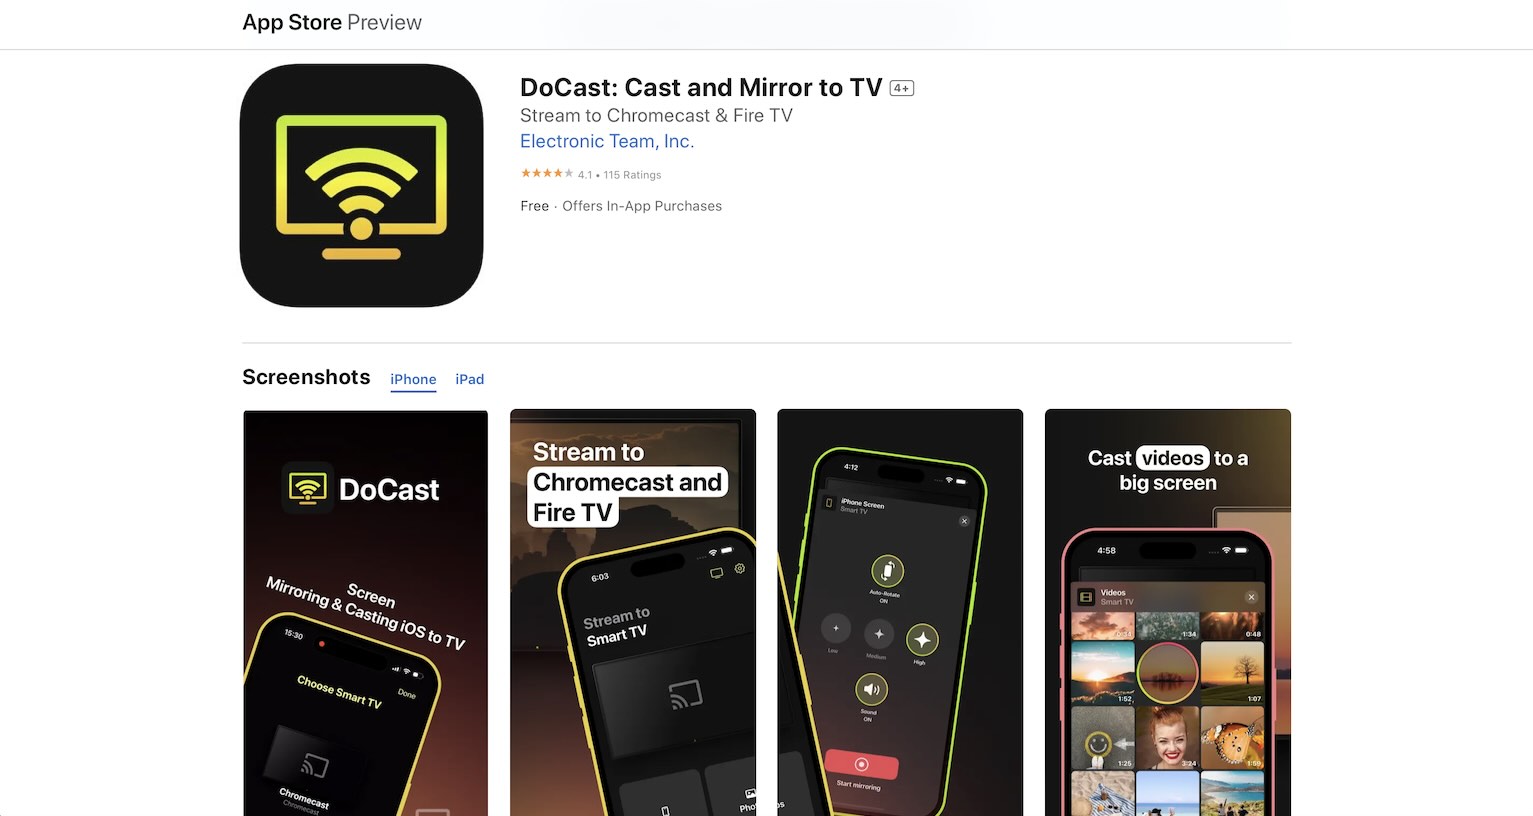 DoCast on the App Store